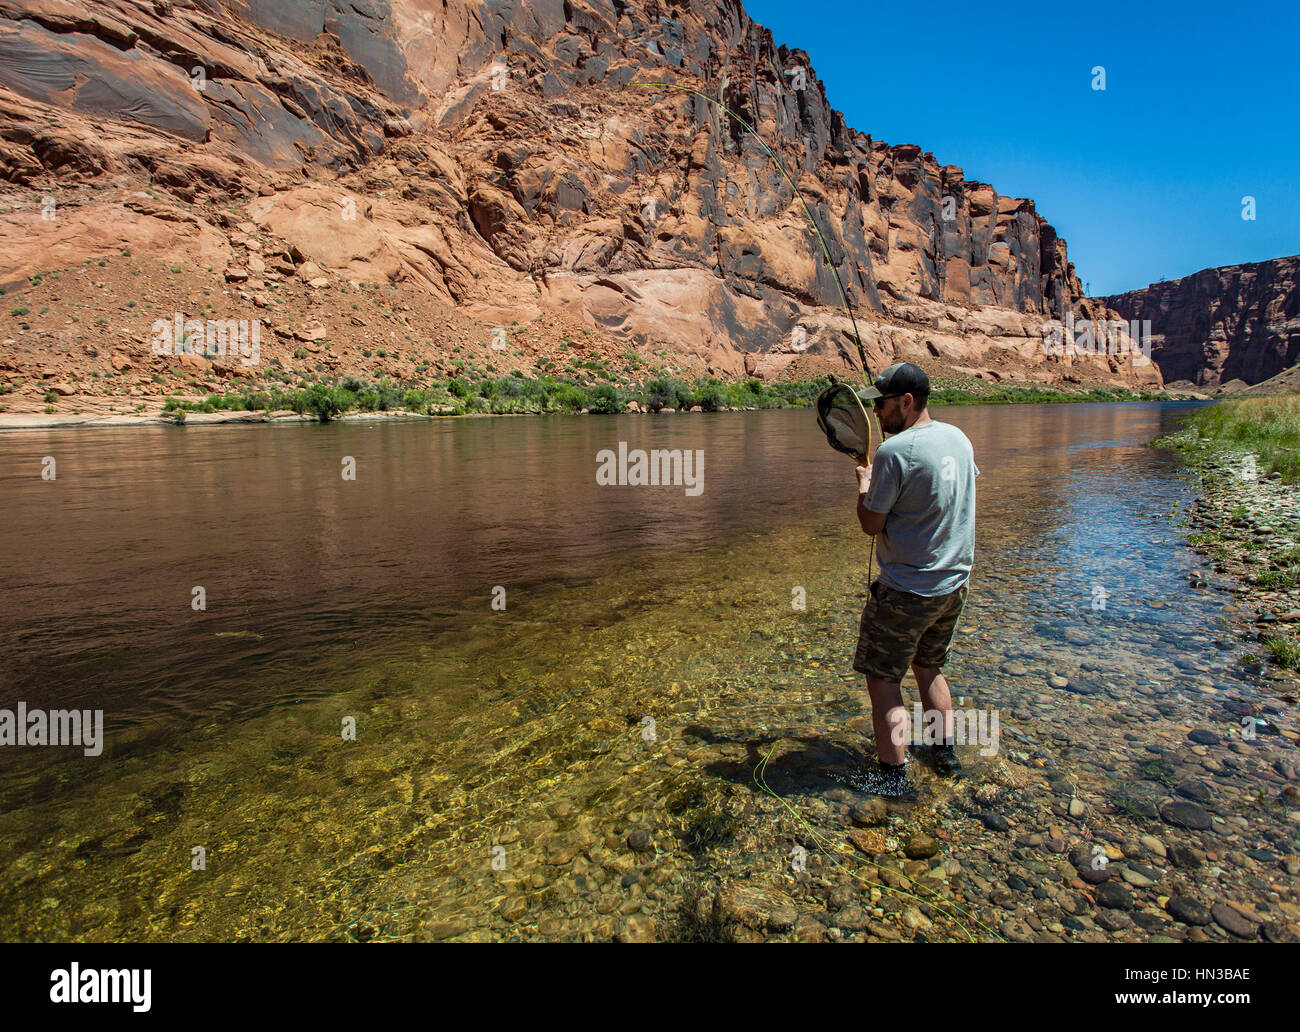 Man Reels In Fish On The Colorado River In The Grand Canyon Stock Photo -  Alamy